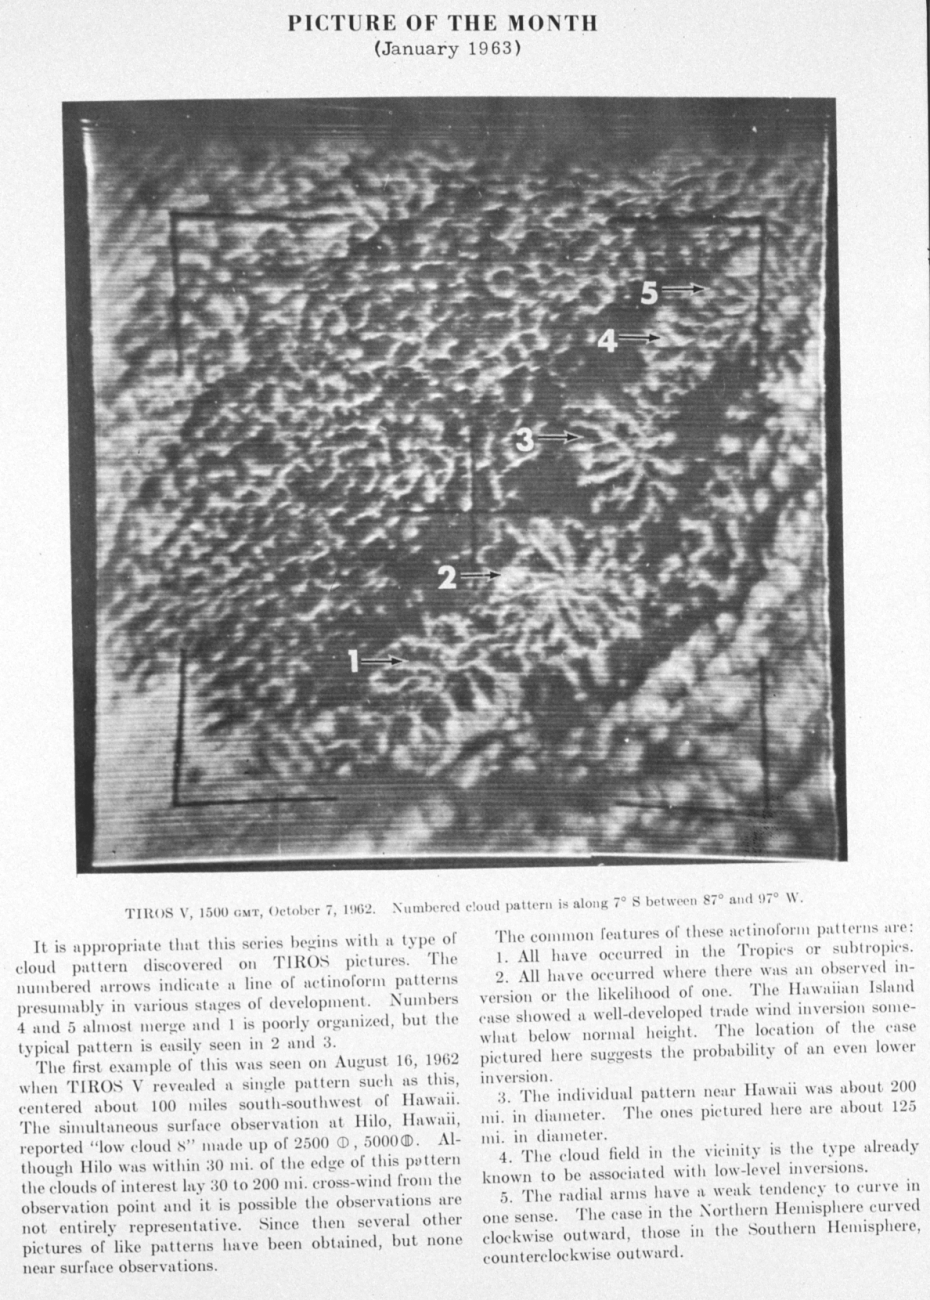 The first of the Monthly Weather Review Picture of the Month series, aspublished in January 1963